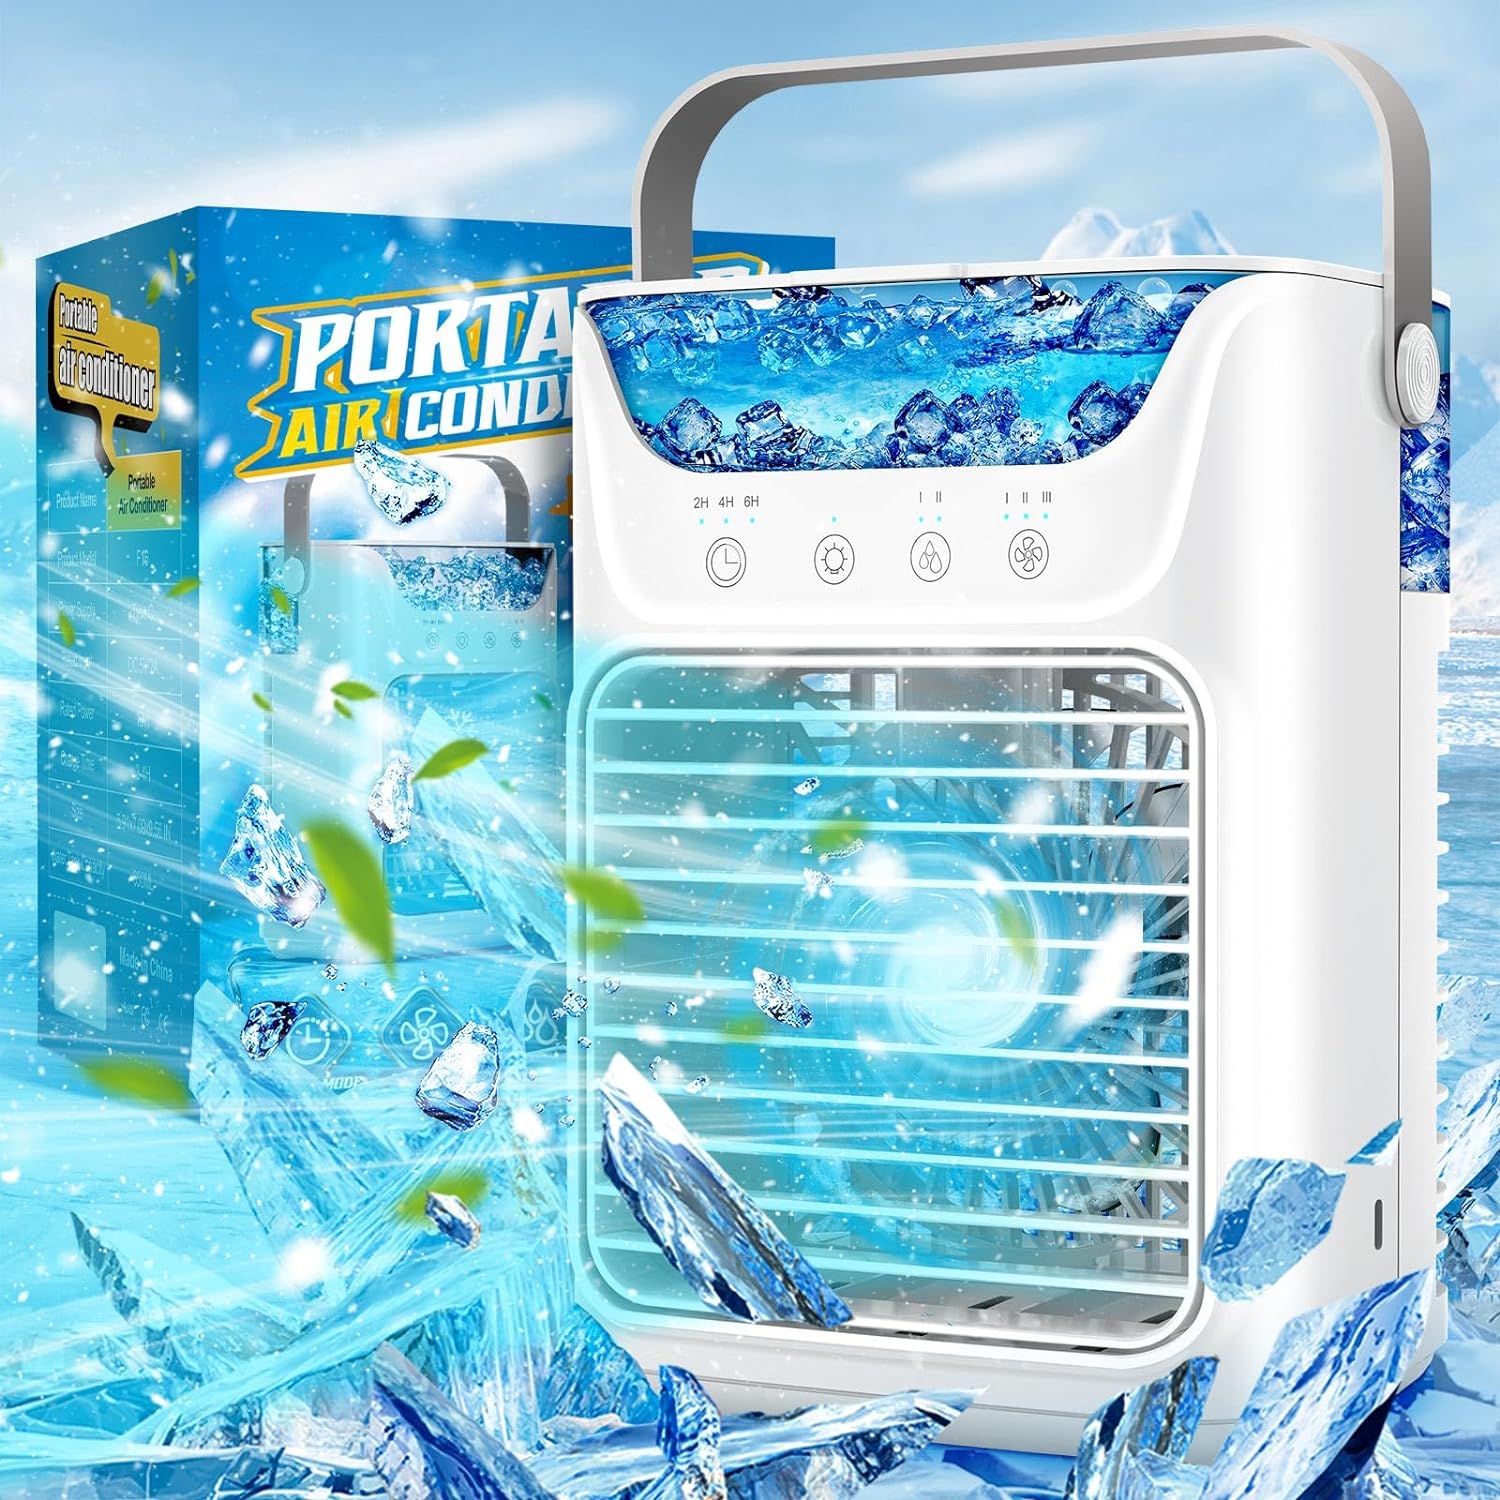 (⭐⭐ HOT SALE NOW) Mini Air Conditioners,Portable Air Conditioner Fan with Touch Screen